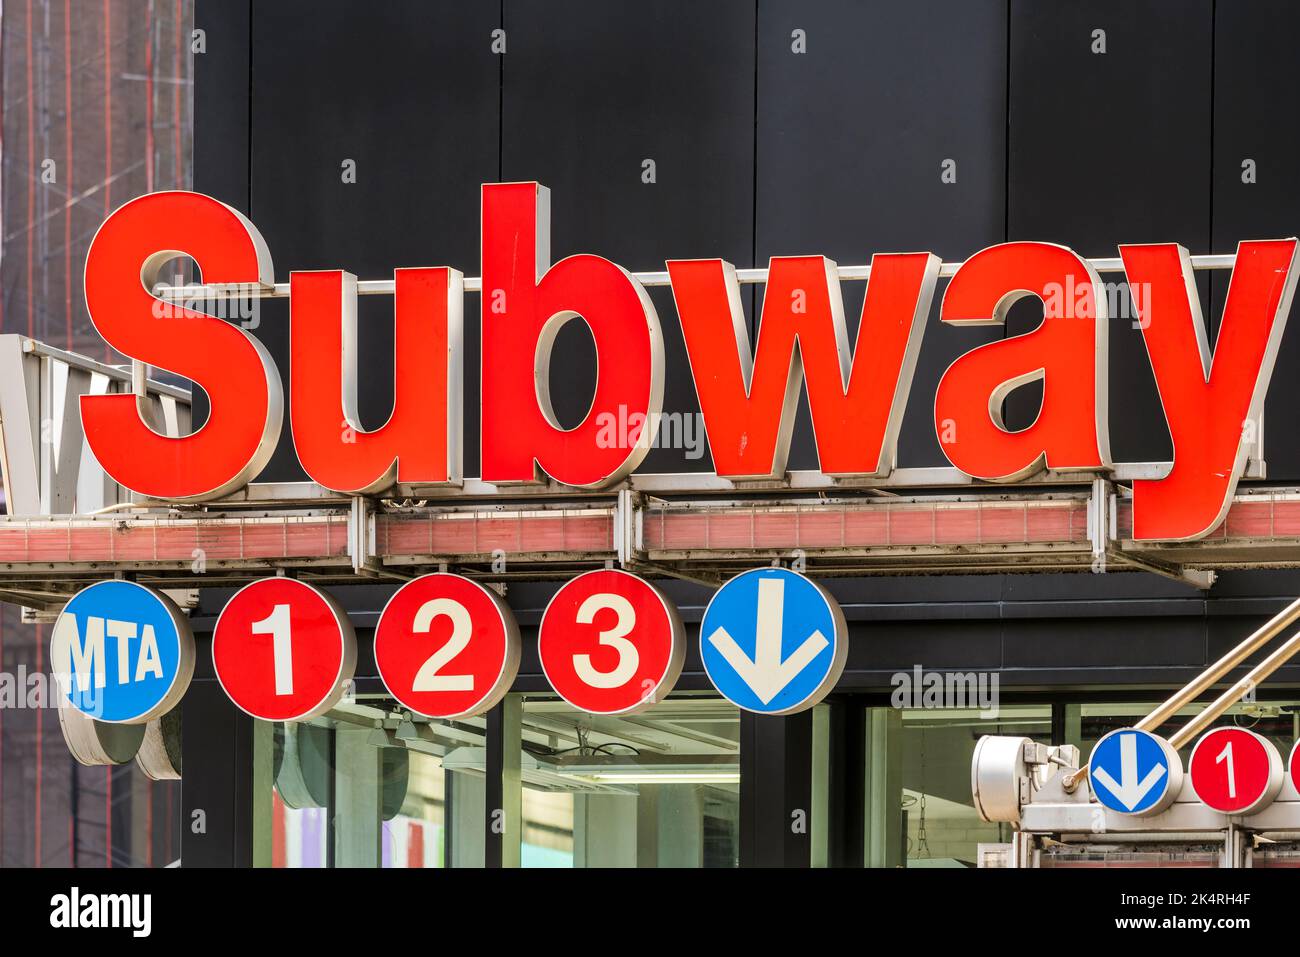 Subway lines sign at the entrance of a subway station in New York, USA Stock Photo